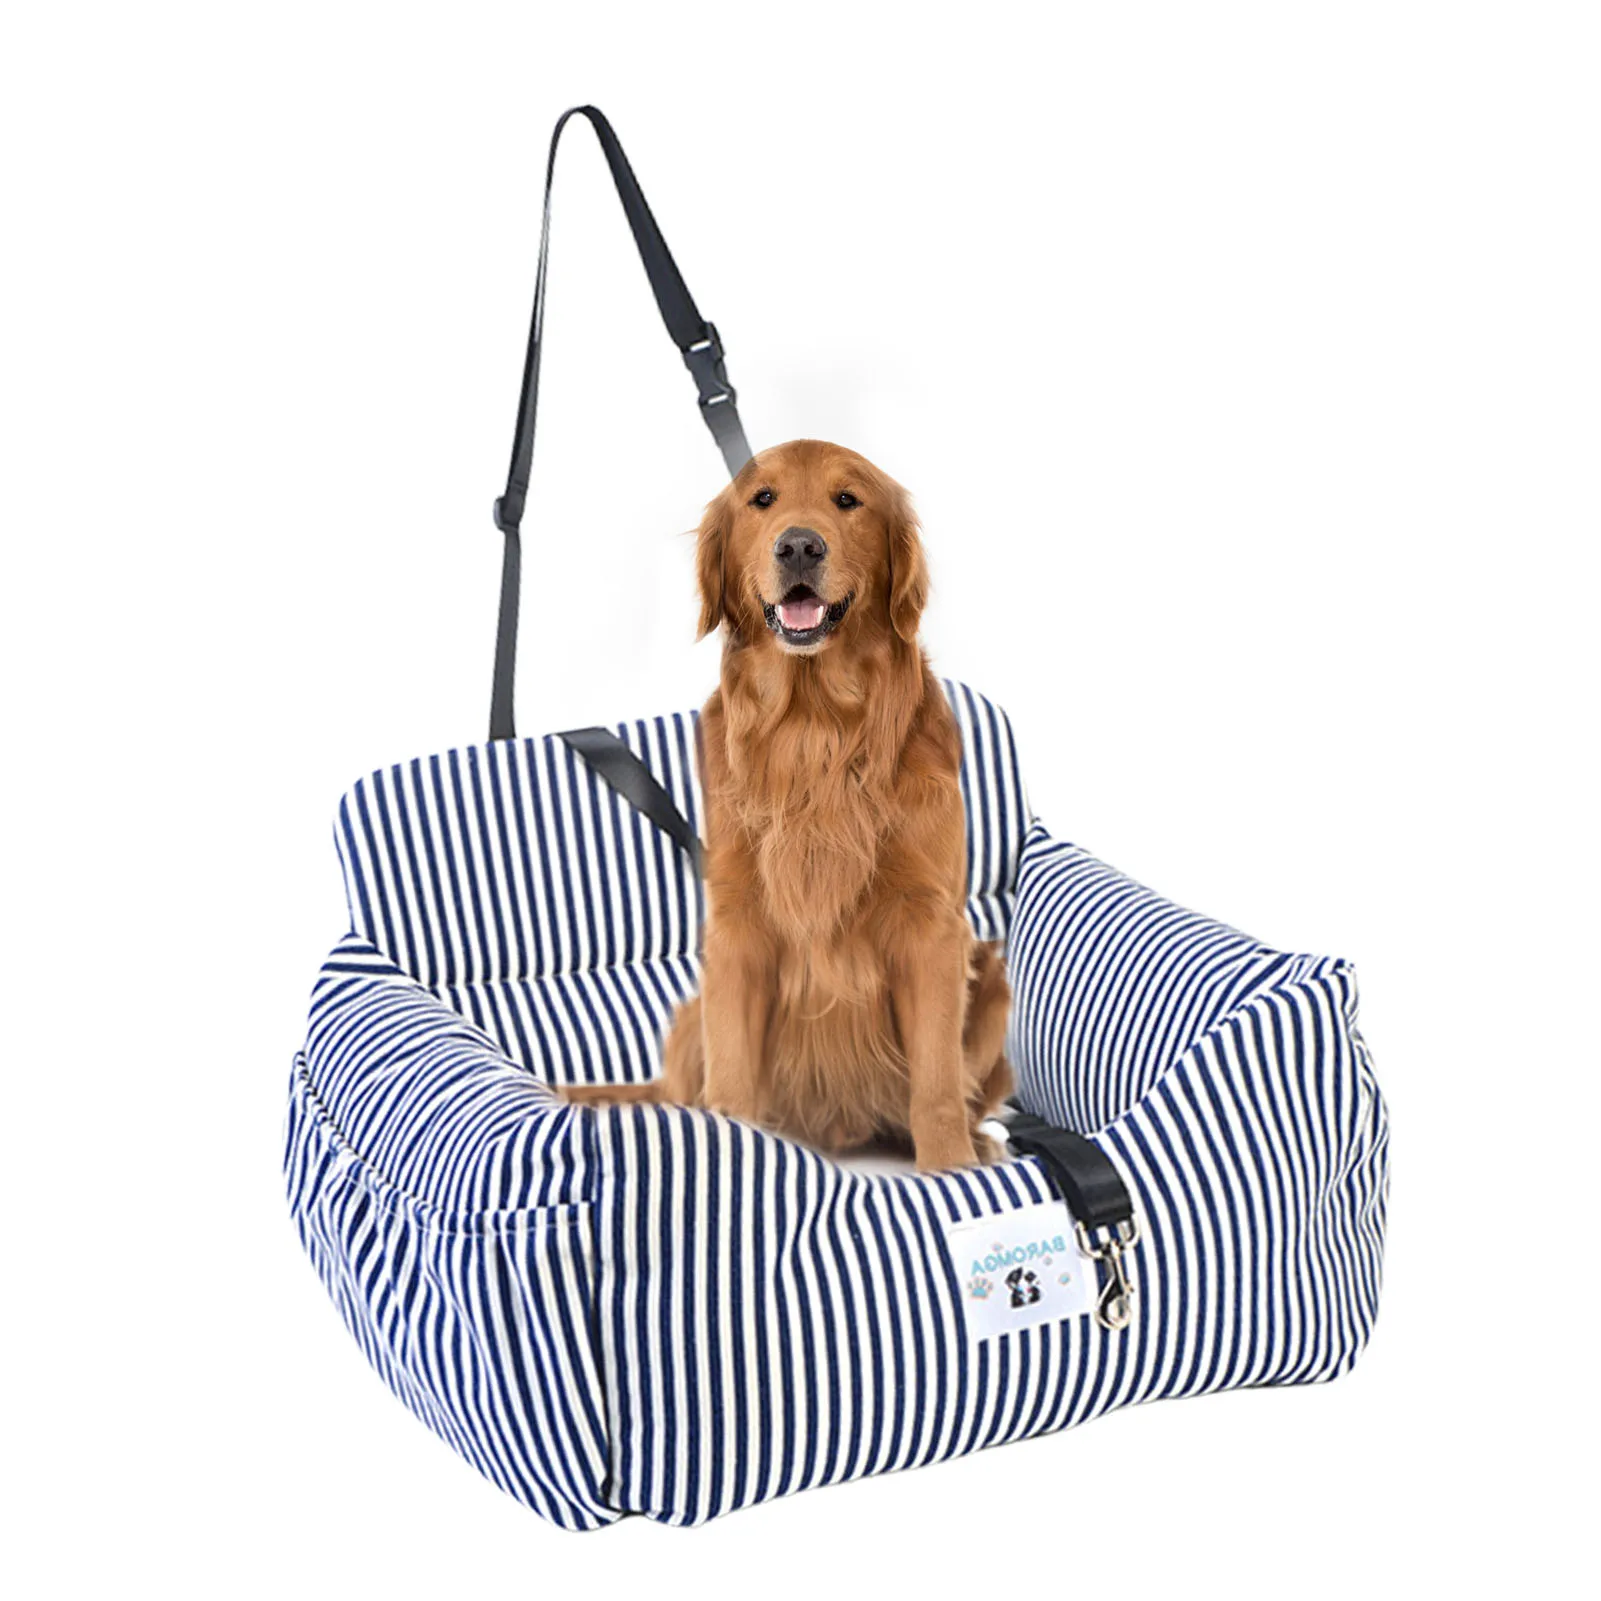 

Soft Dog Car Seats Travel Dog Carriers For Small Dogs Portable Dog Car Travel Carrier Bed With Clip-On Leash For Dogs Cats